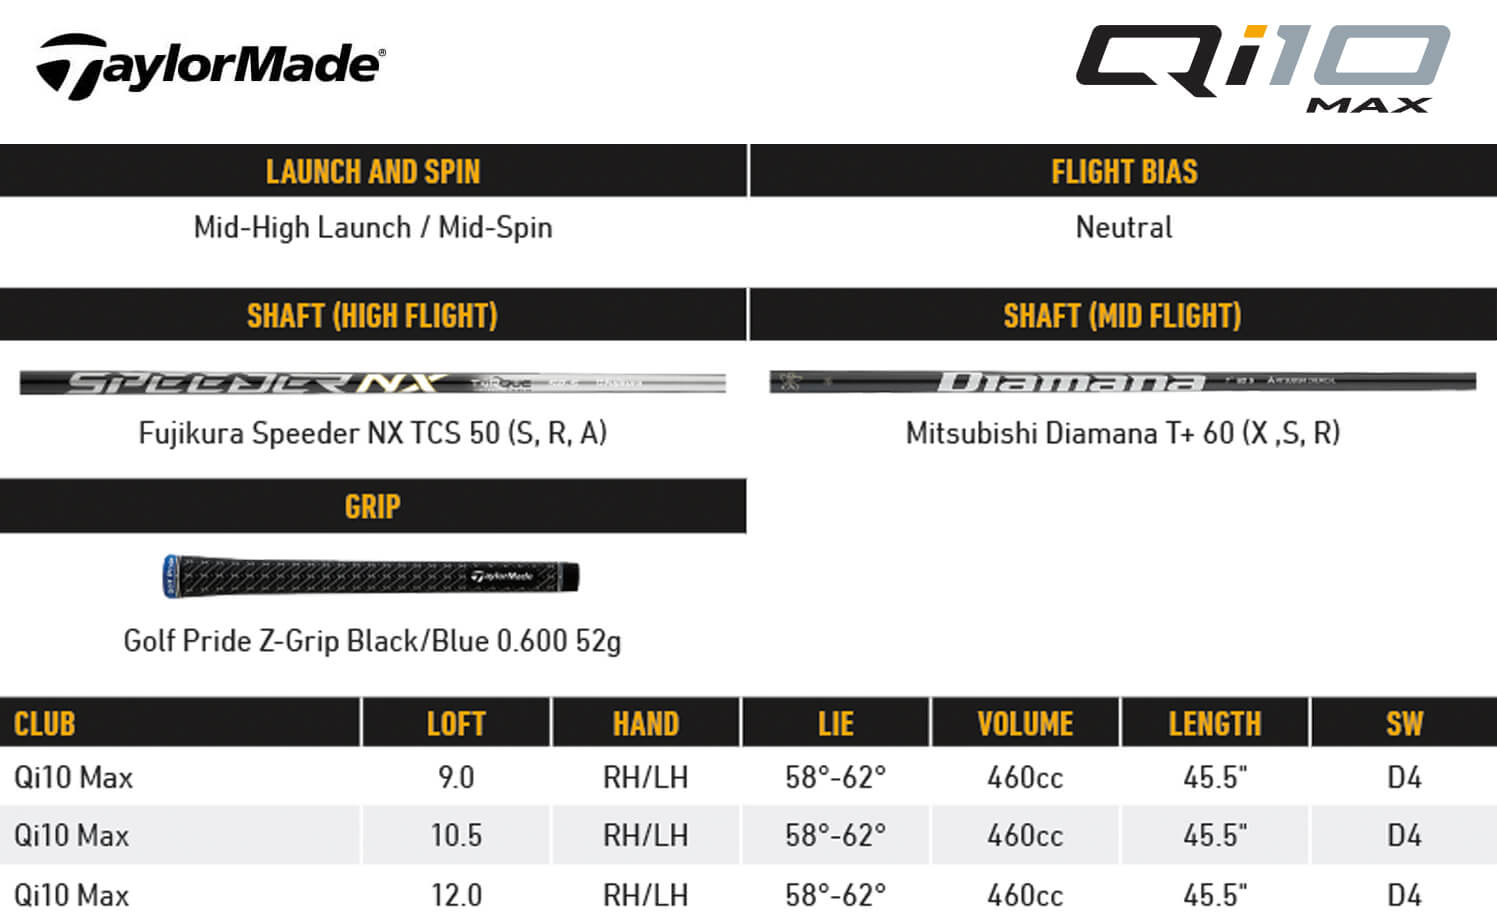 Specification for TaylorMade Qi10 Max Driver